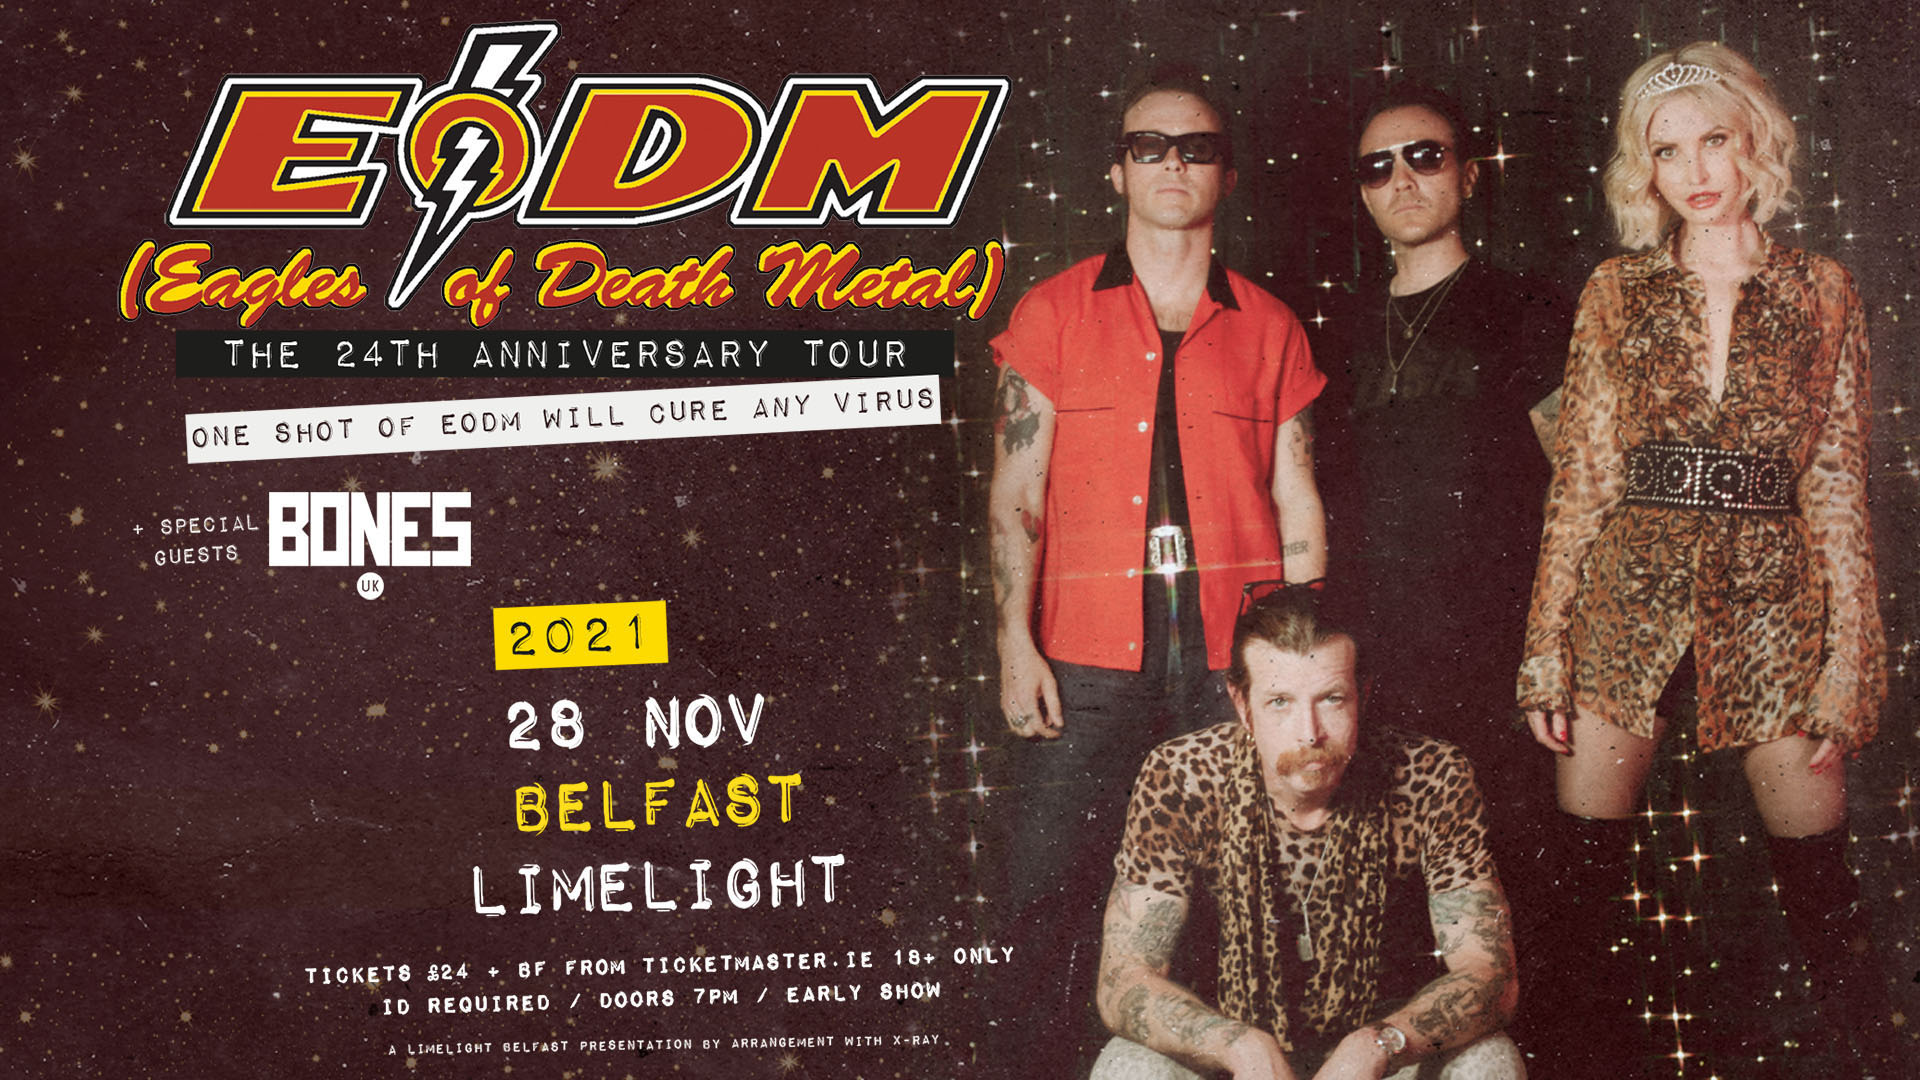 EAGLES OF DEATH METAL announce headline Belfast show at Limelight 1, Sunday 28th November 2